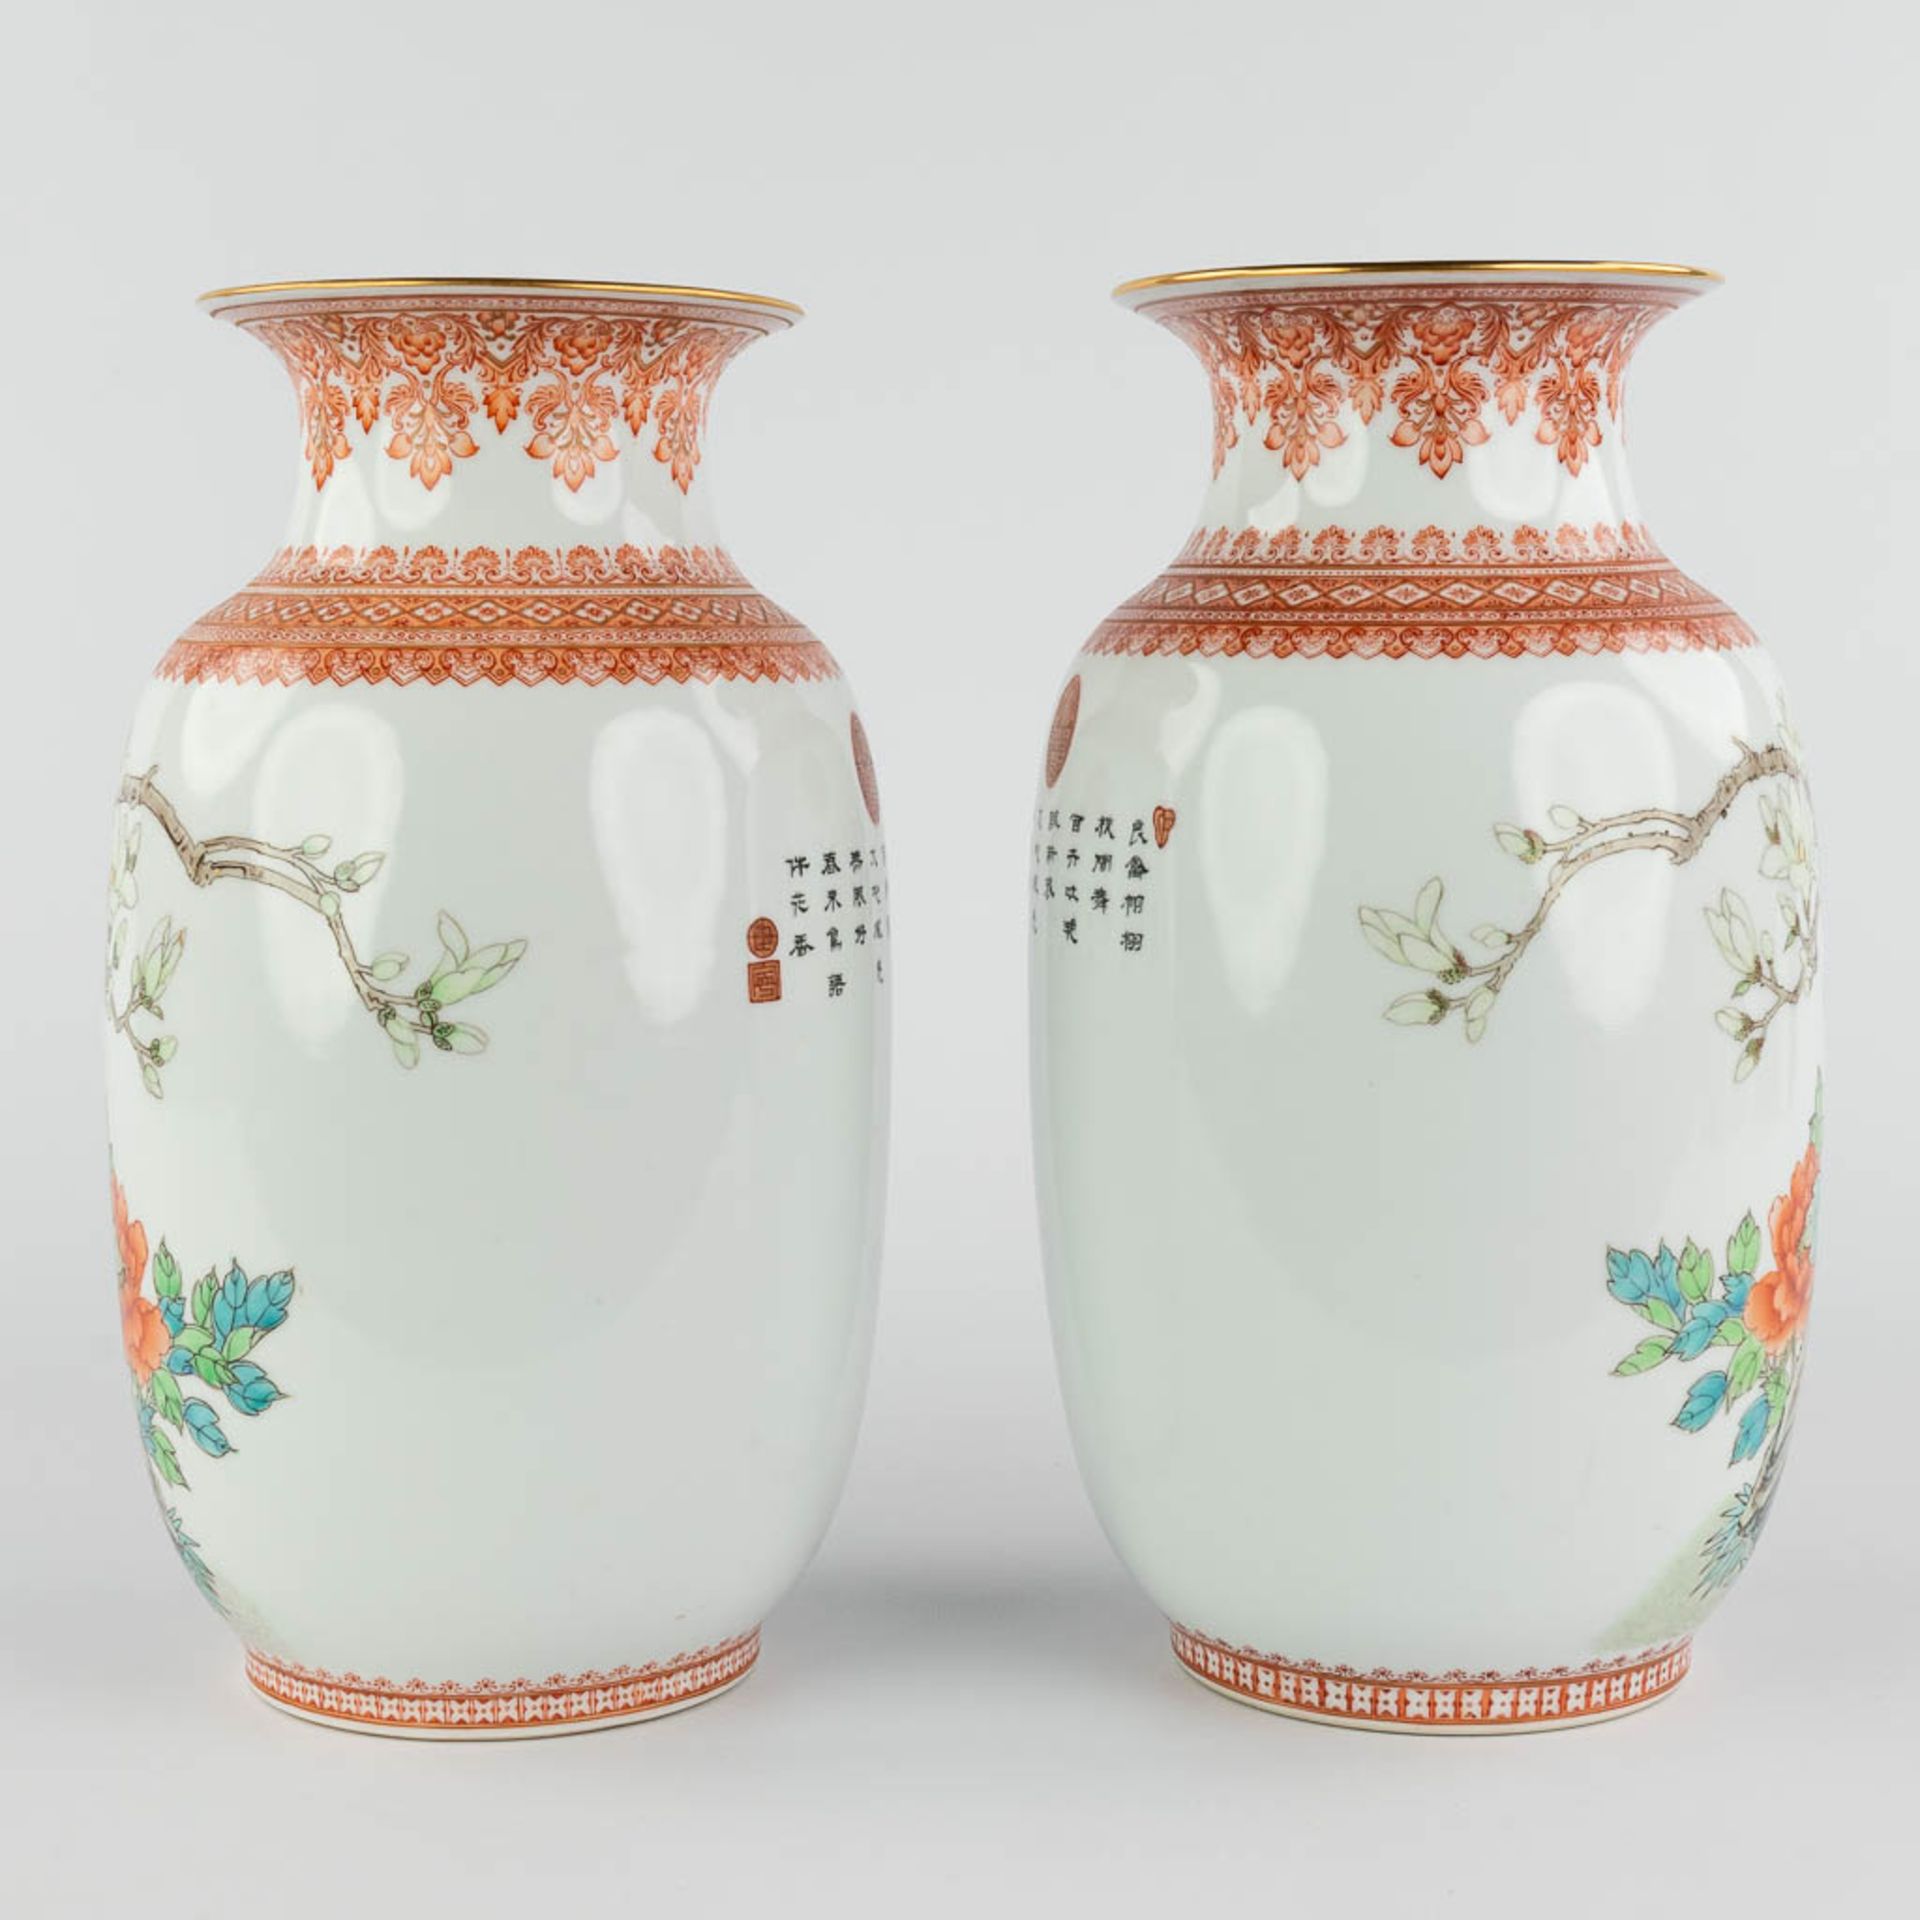 A pair of Chinese vases with bird decor, spring blossoms and peonies. 20th C. (H:32 x D:18 cm) - Image 3 of 12